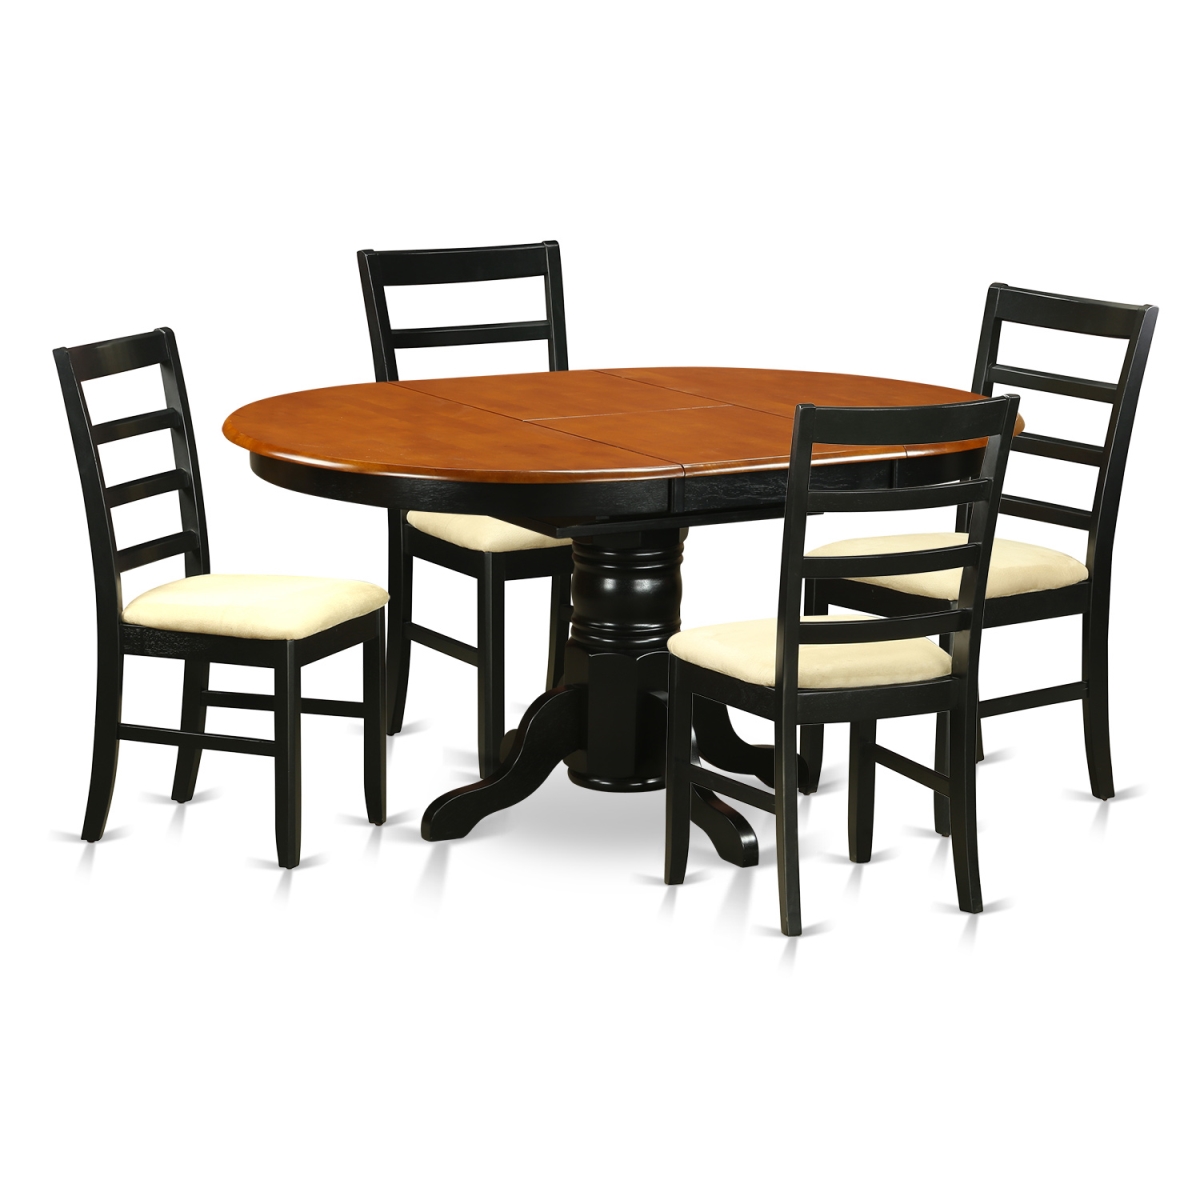 Picture of East West Furniture AVPF5-BCH-C Microfiber Dining Set with 4 Wooden Chairs, Black & Cherry - 5 Piece